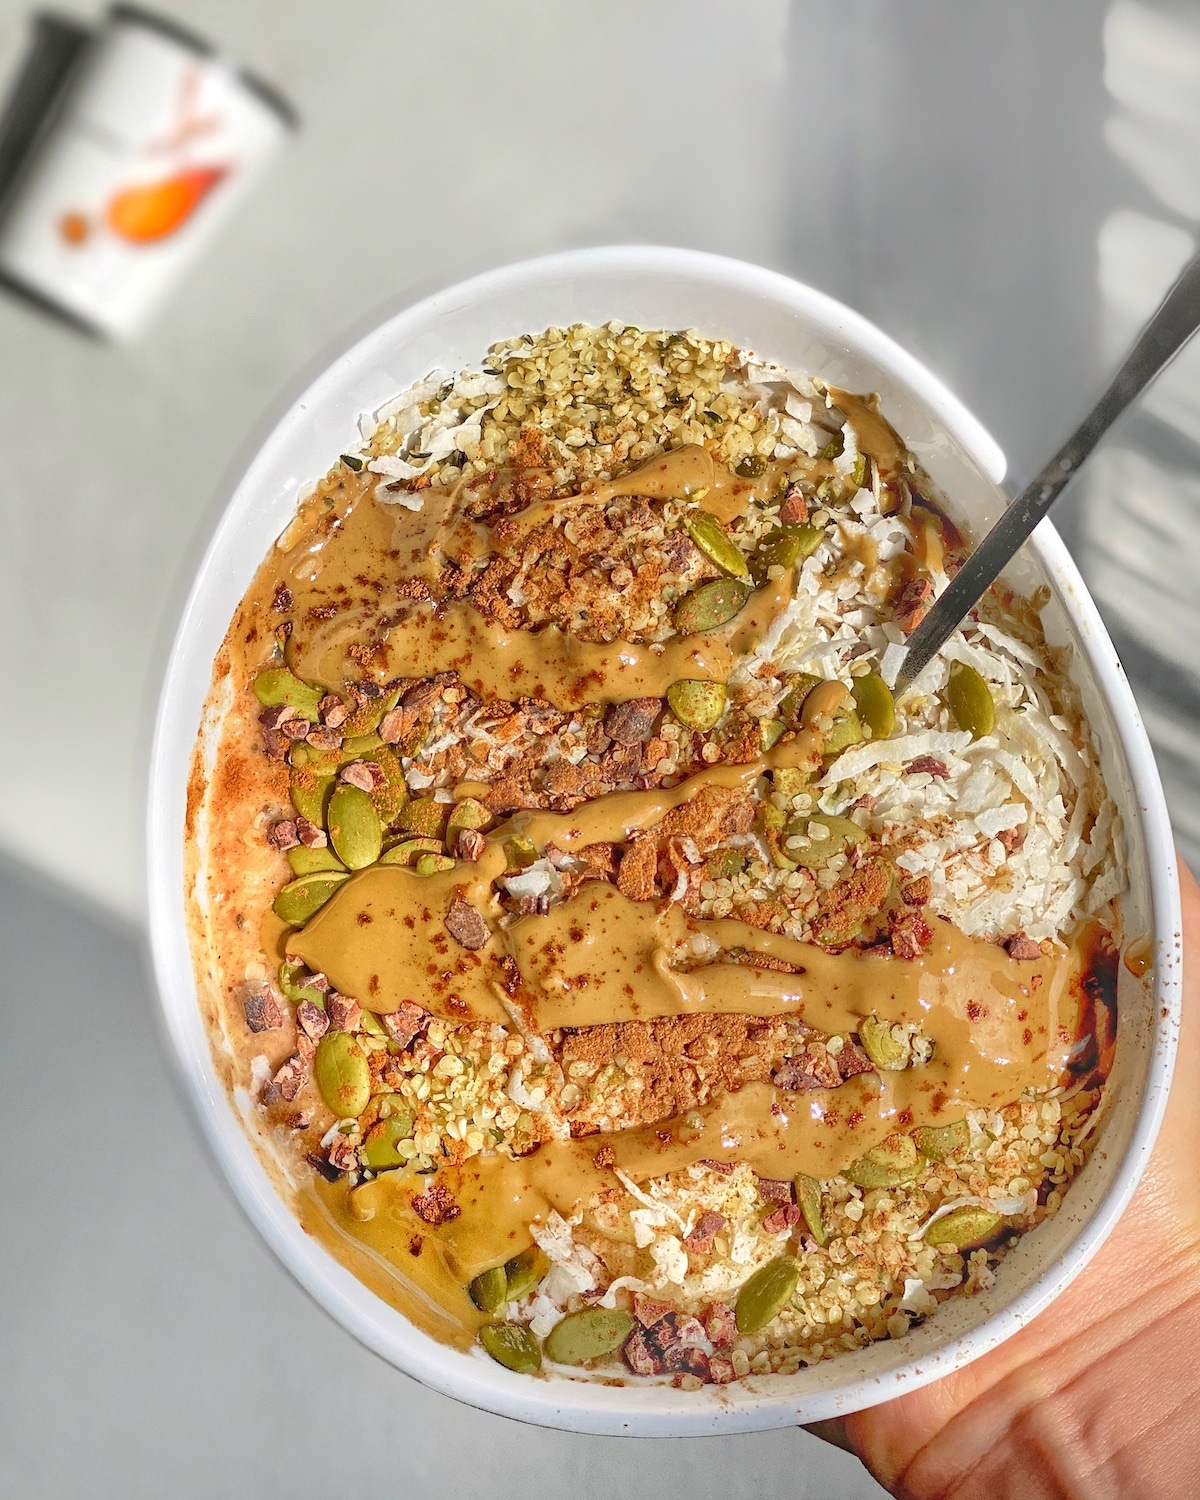 Holding white bowl with orange carrot cake smoothie bowl inside, topping with seeds and cinnamon.